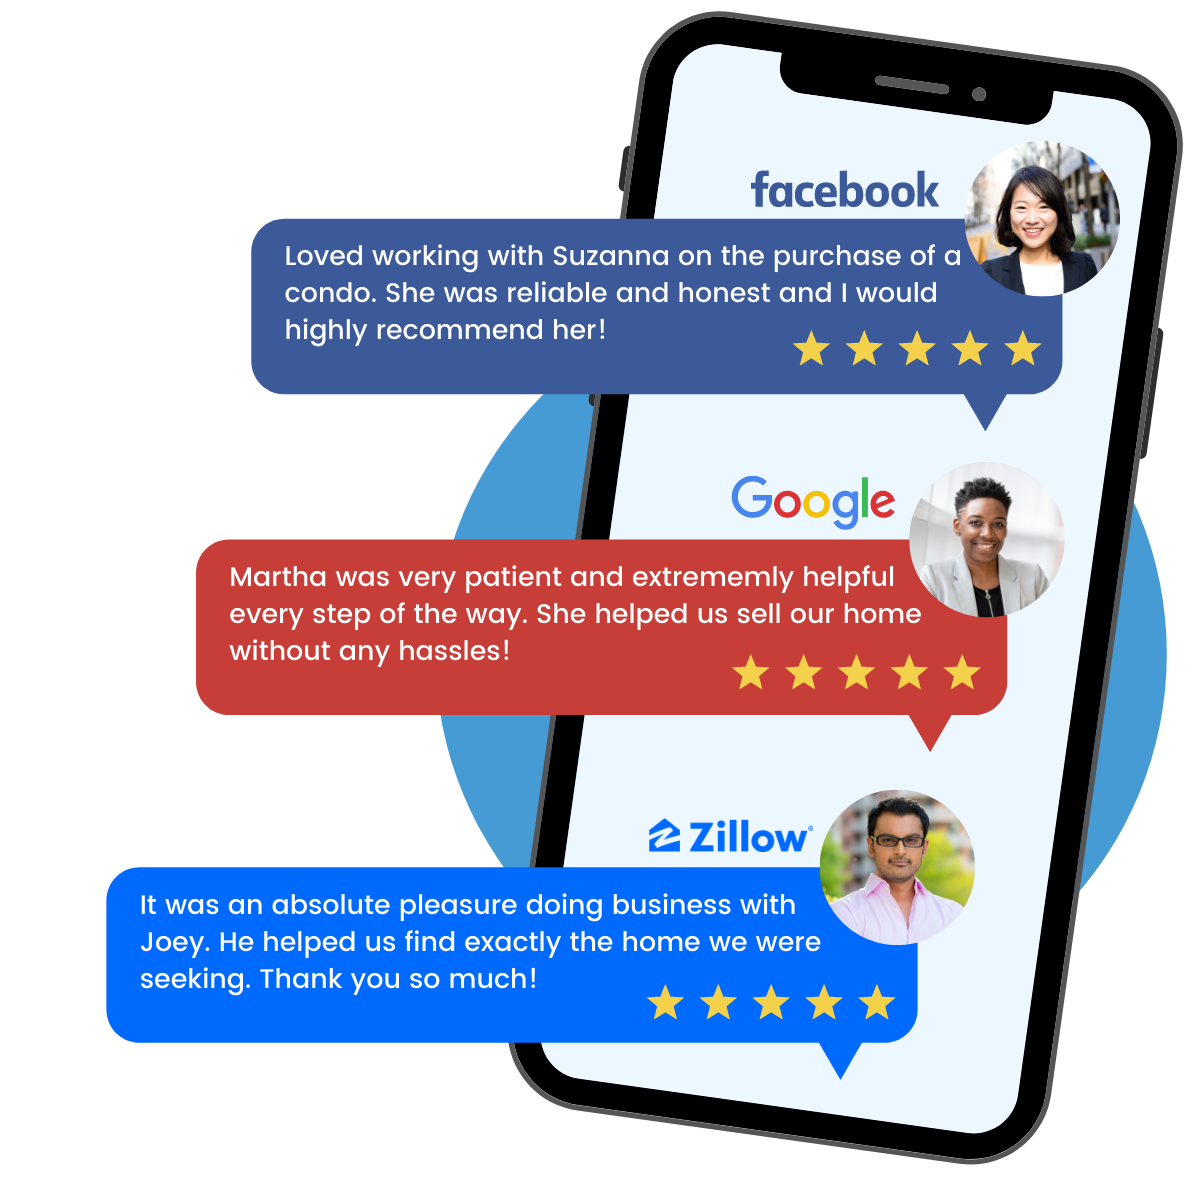 New Testimonial Tools Allows Real Estate Agents to Collect and Publish Reviews from Facebook, Zillow & Google Automatically